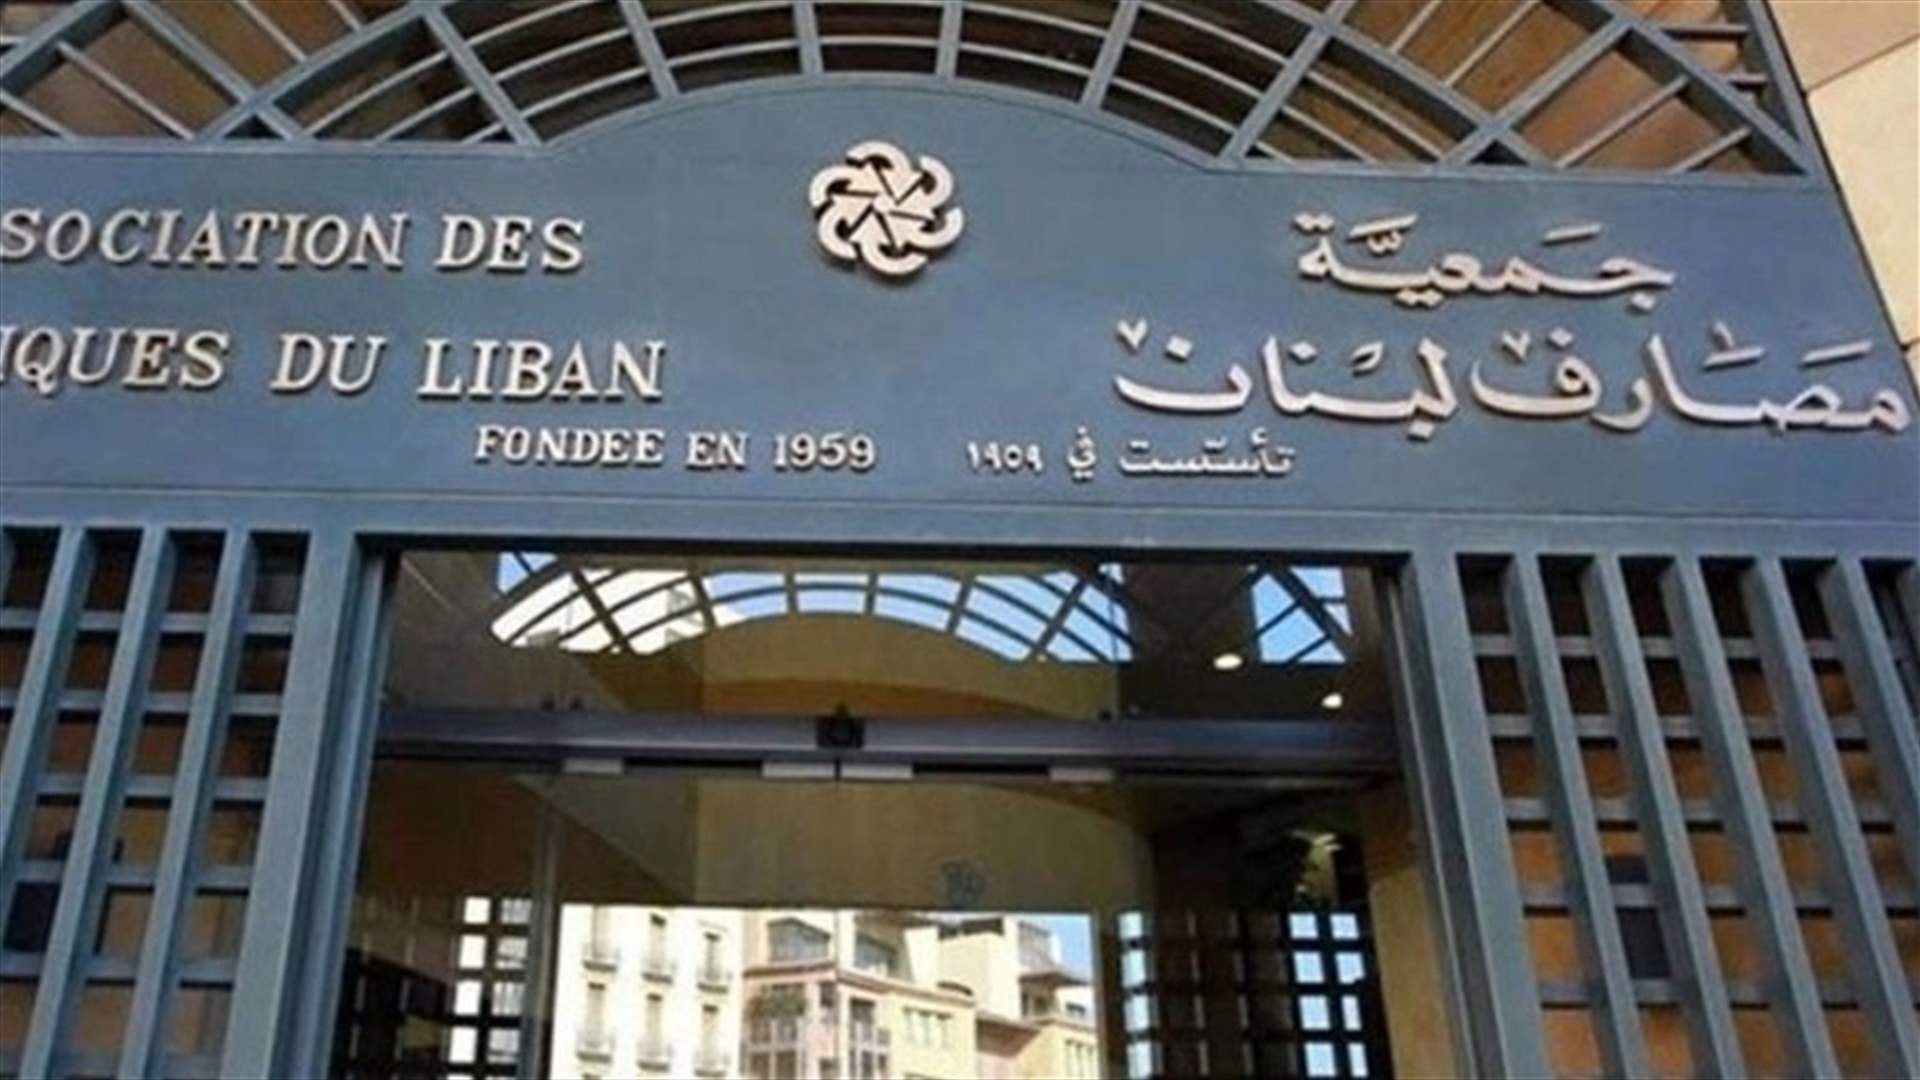 Sources to LBCI: Meeting to be held on Sunday to decide whether banks will reopen